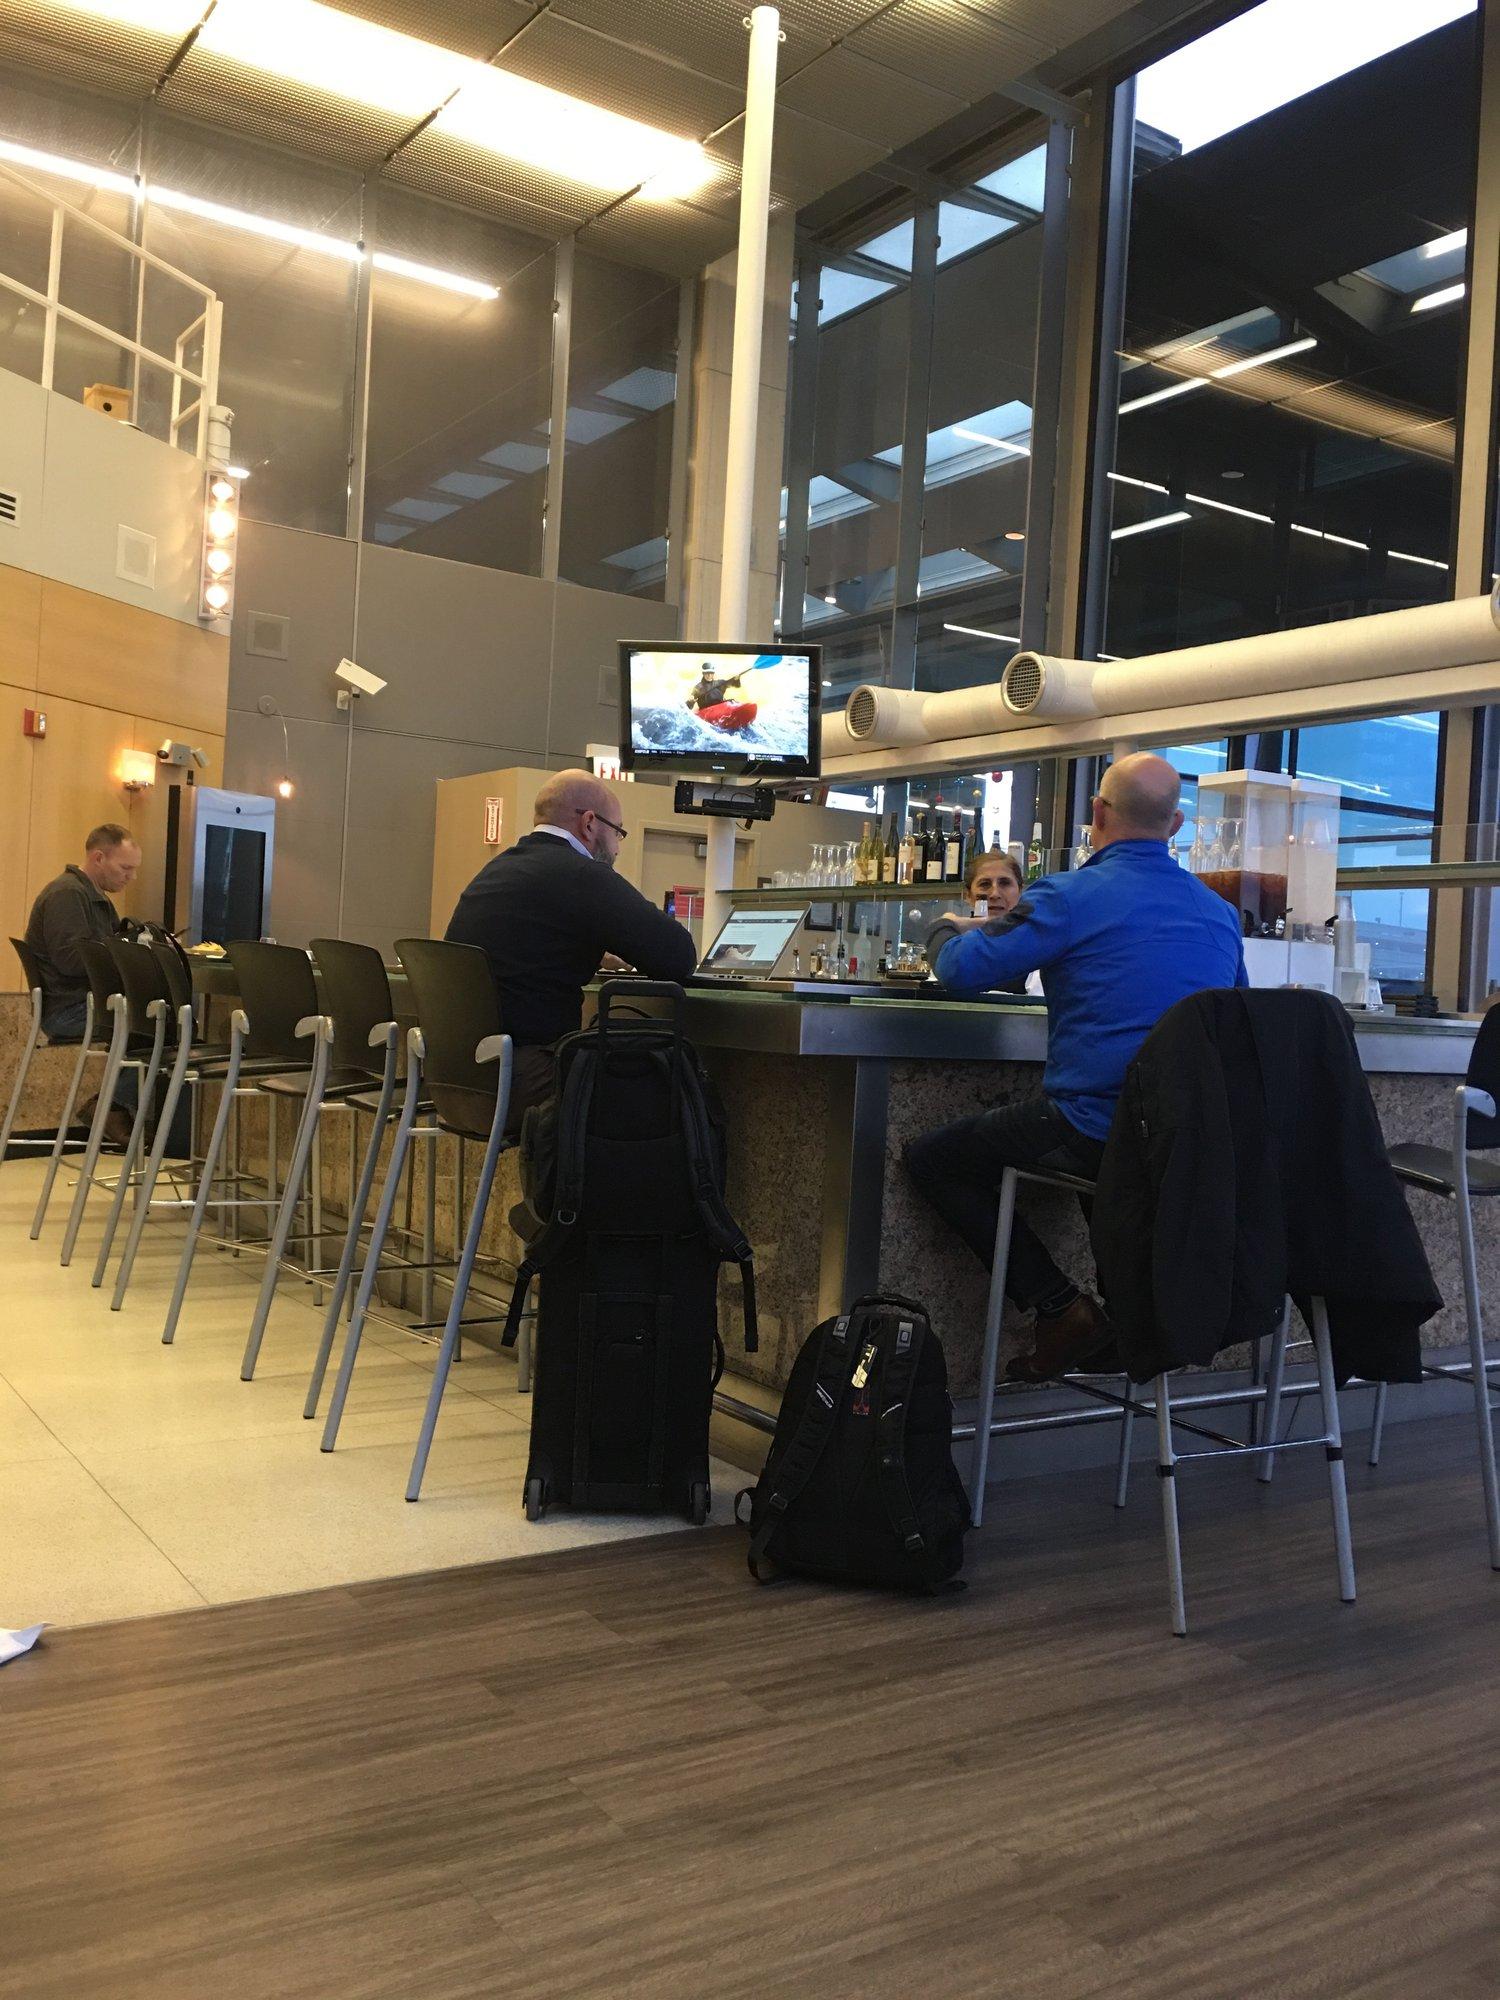 American Airlines Admirals Club image 6 of 6